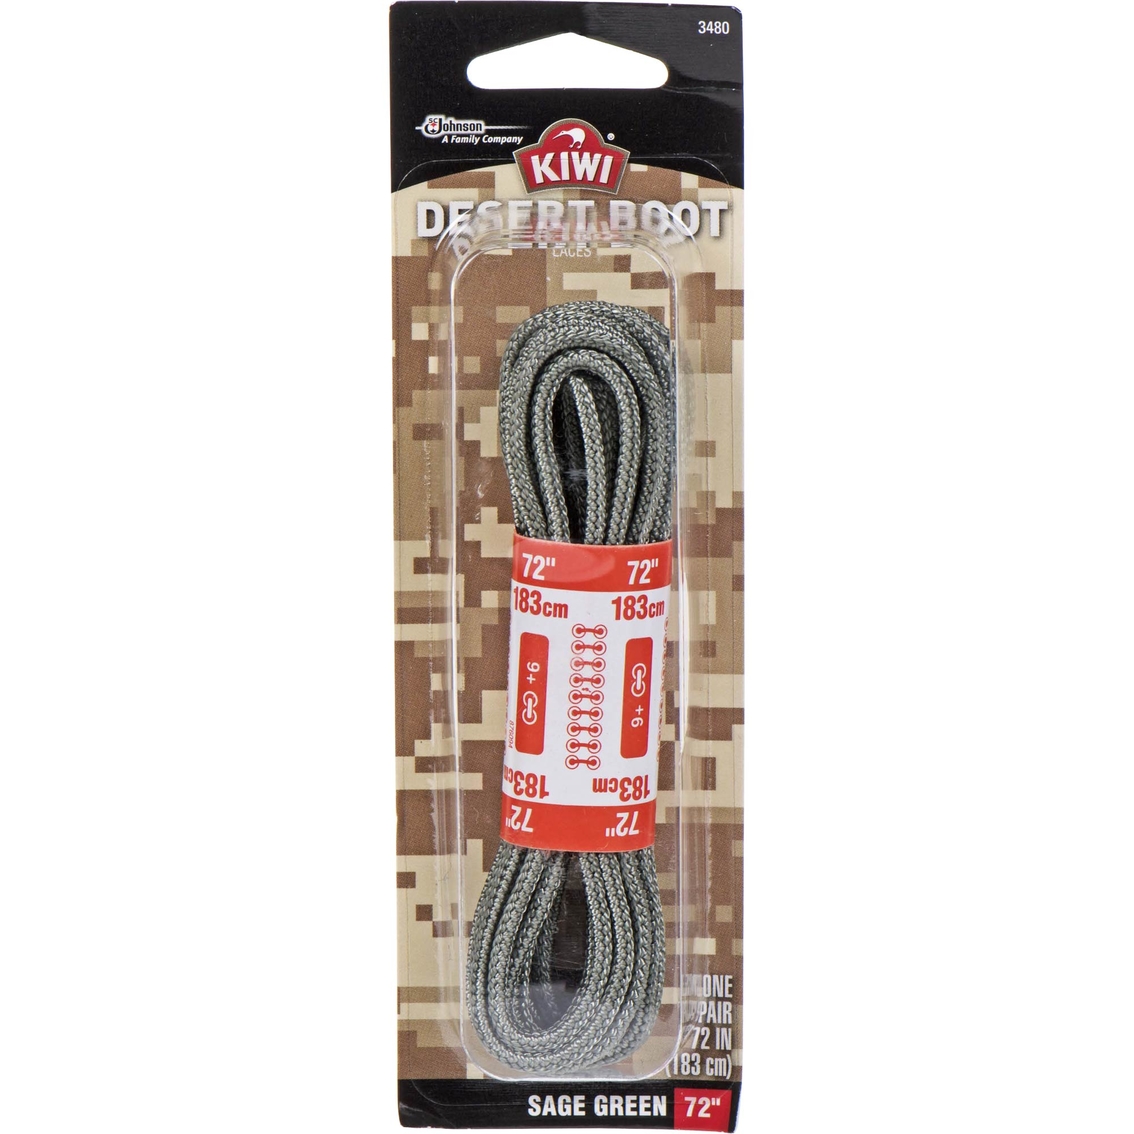 high quality boot laces